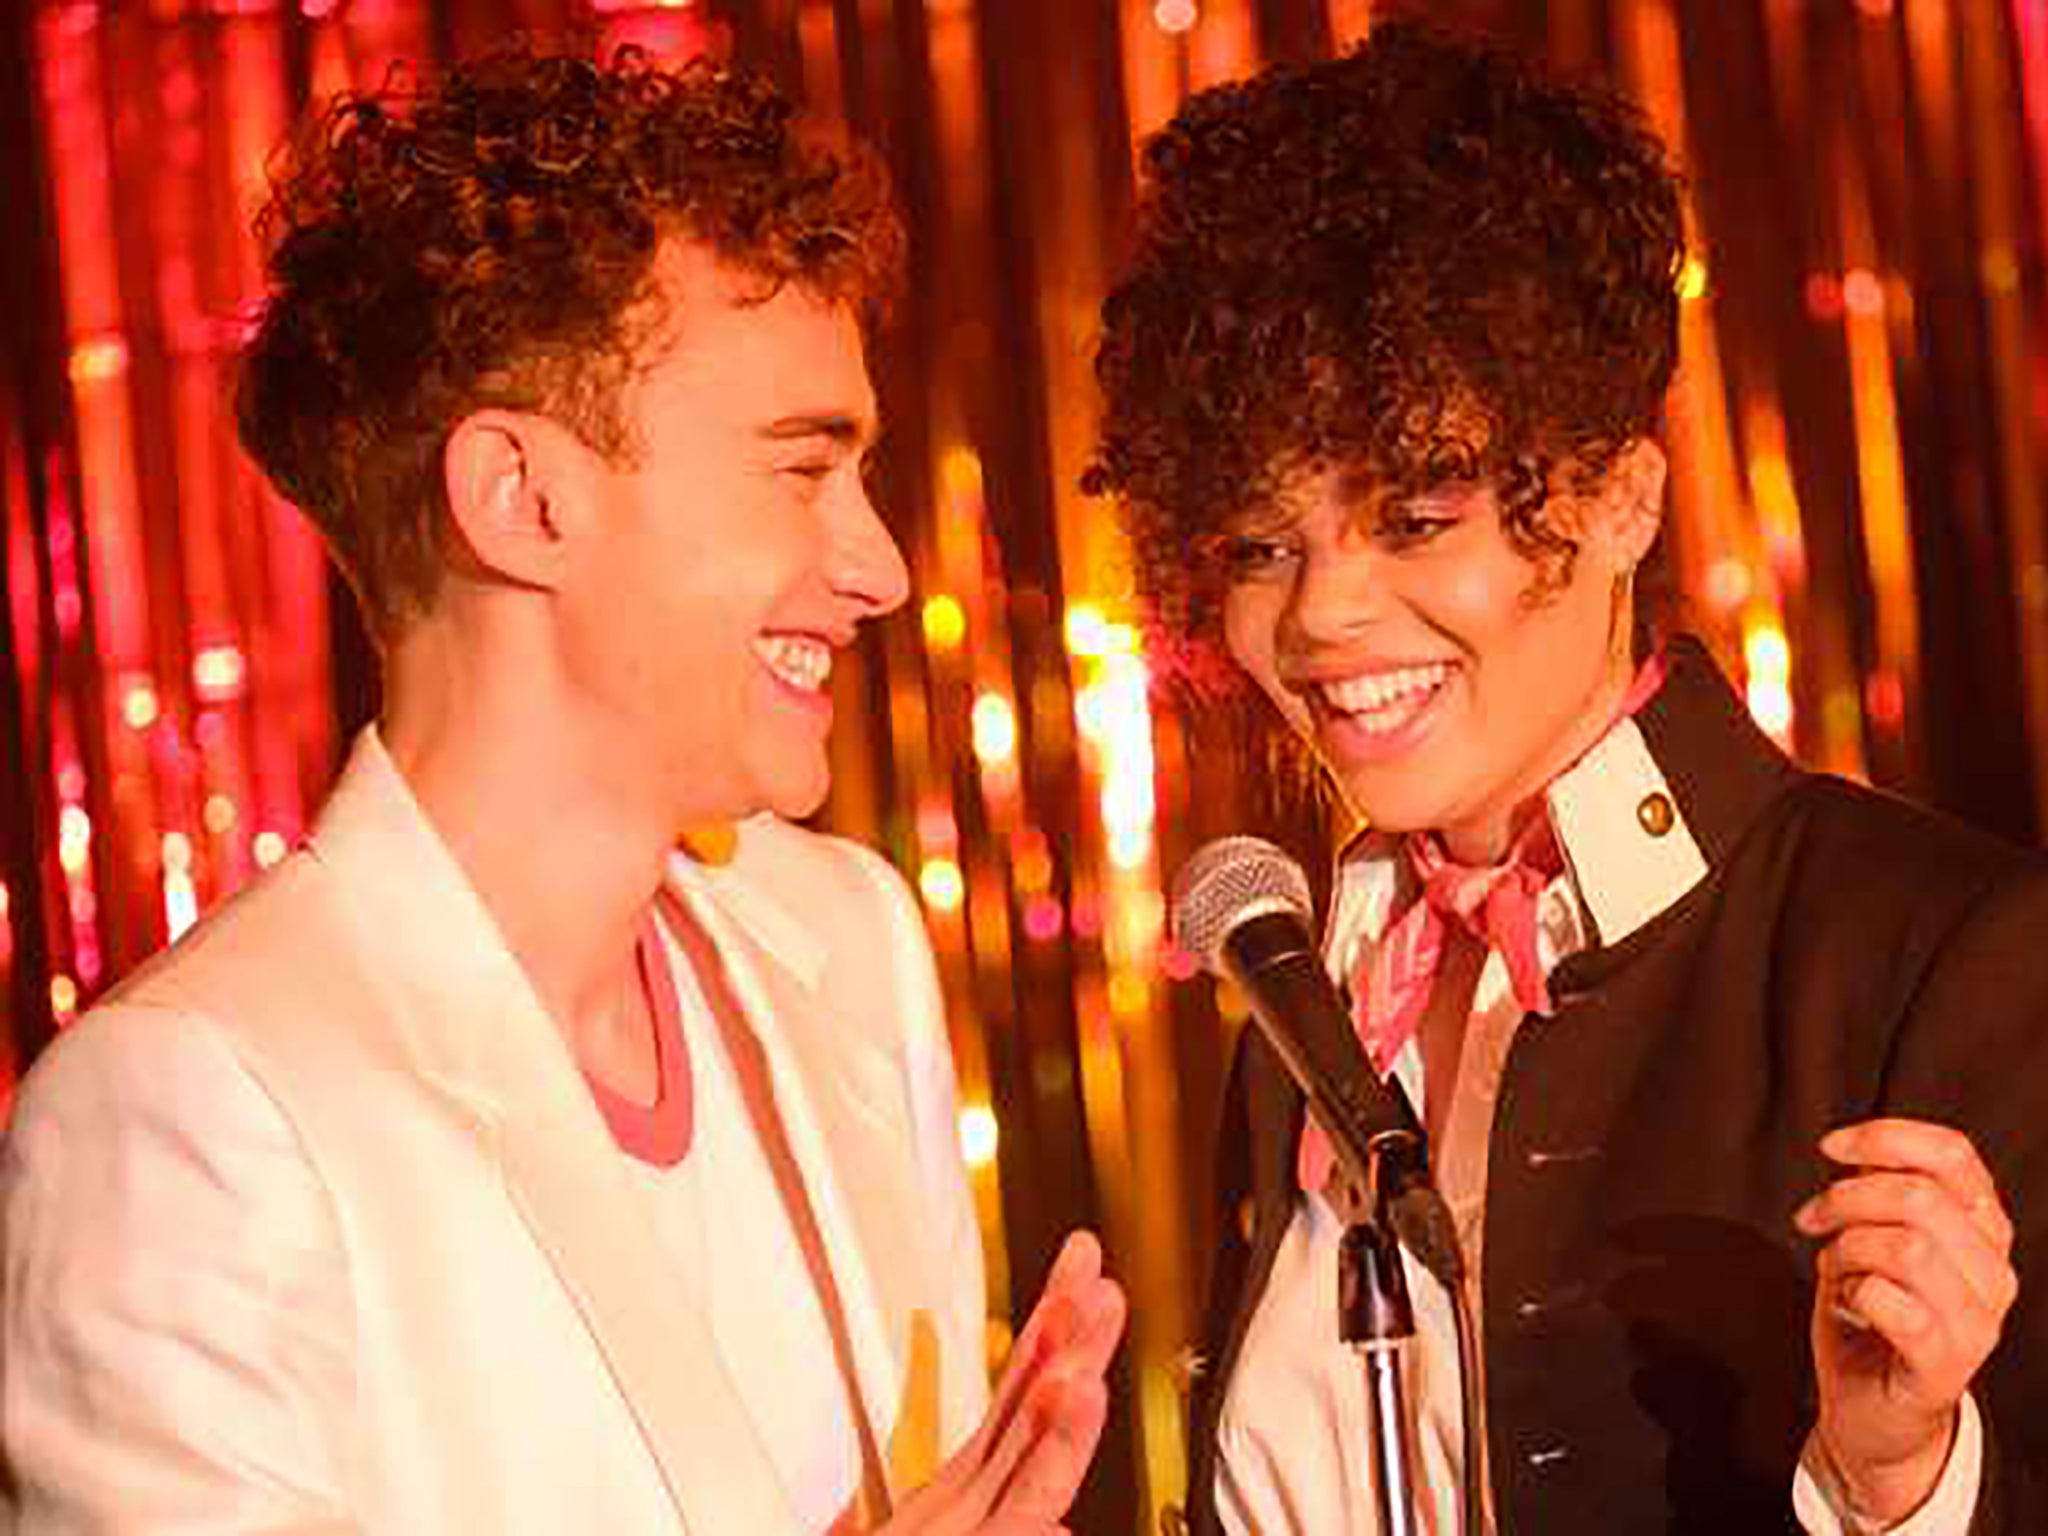 Olly Alexander and Lydia West in It’s a Sin